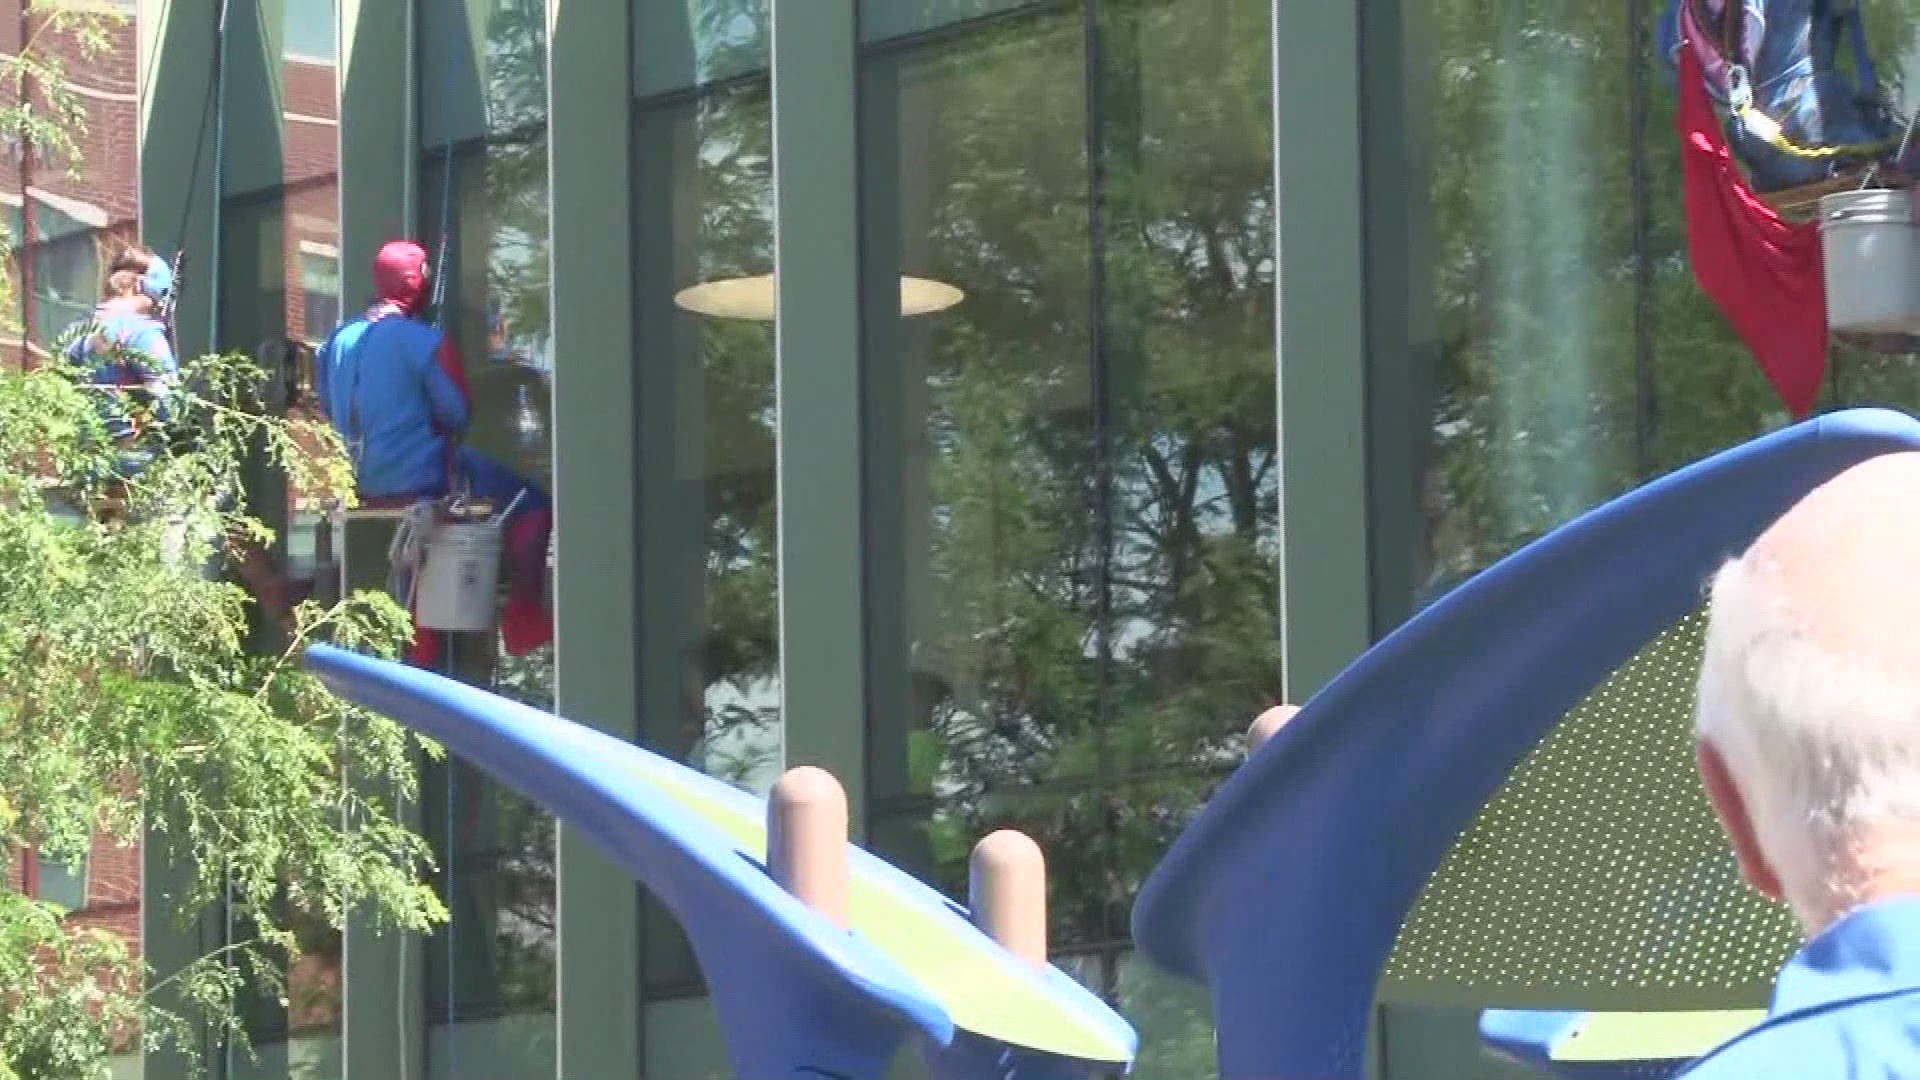 A group of super heroes dropped in for a special surprise outside Akron Children's Hospital.